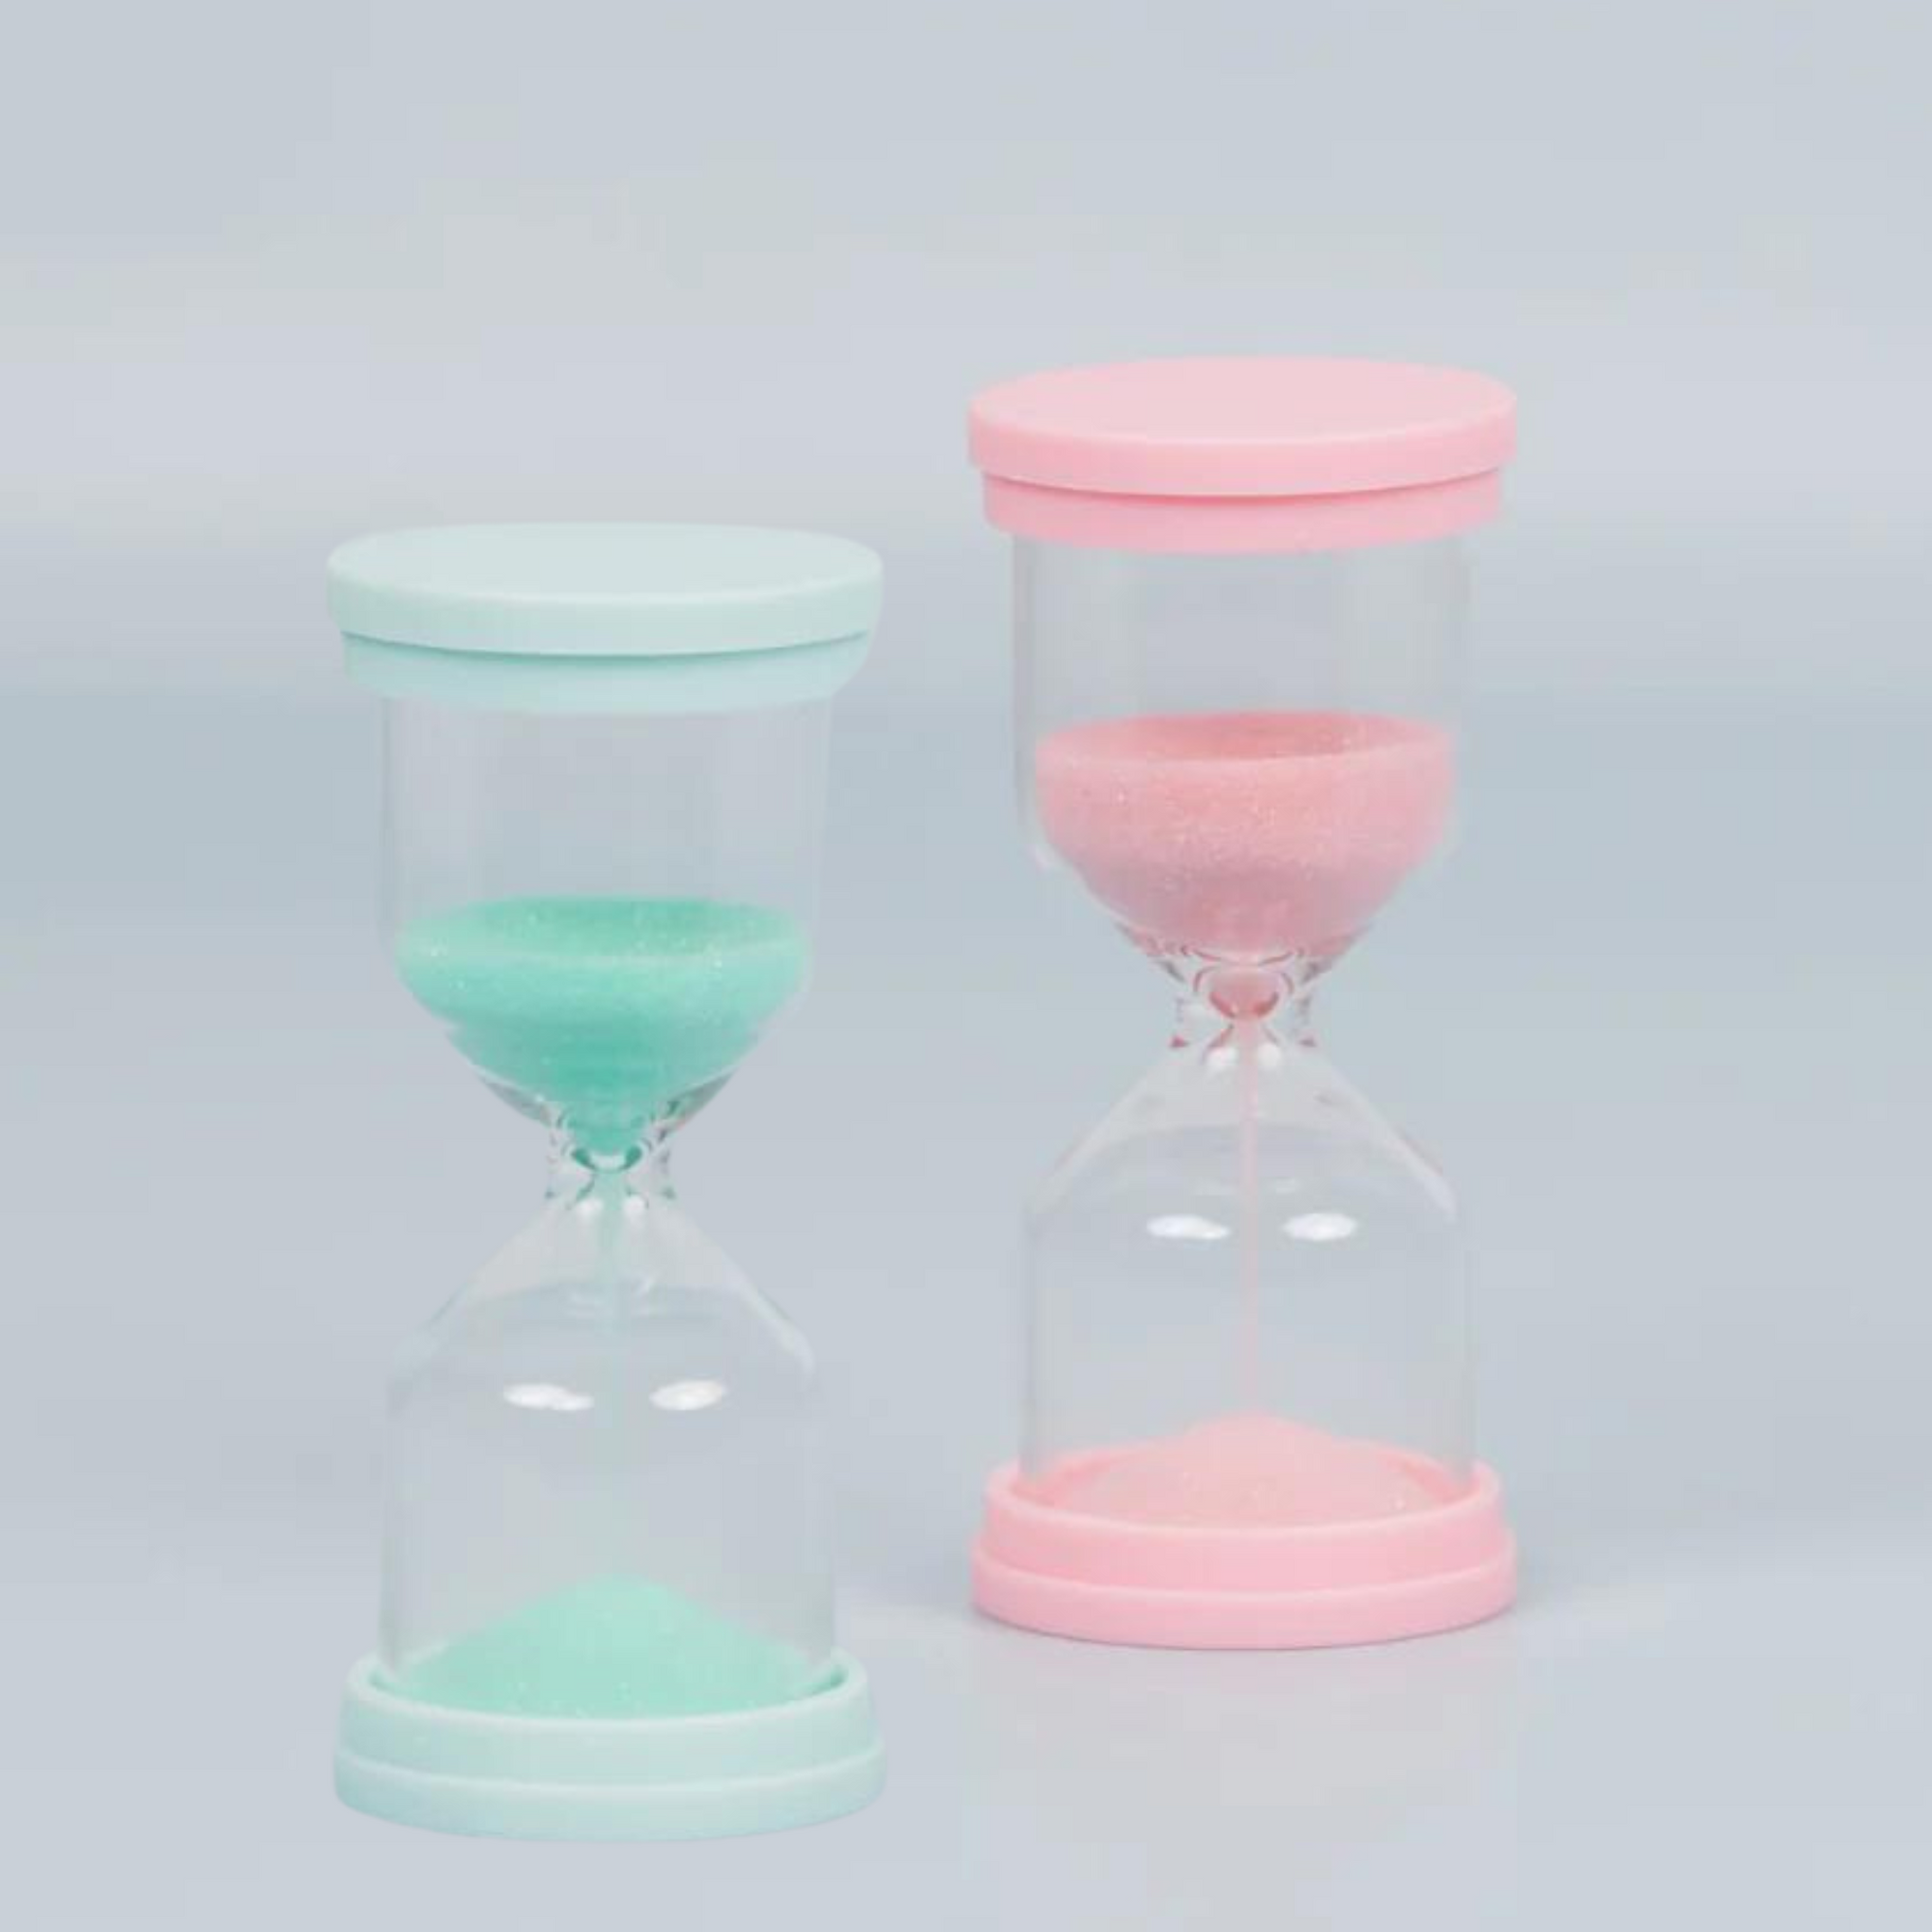 Petite Skin Co 60 Second Cleansing Timer